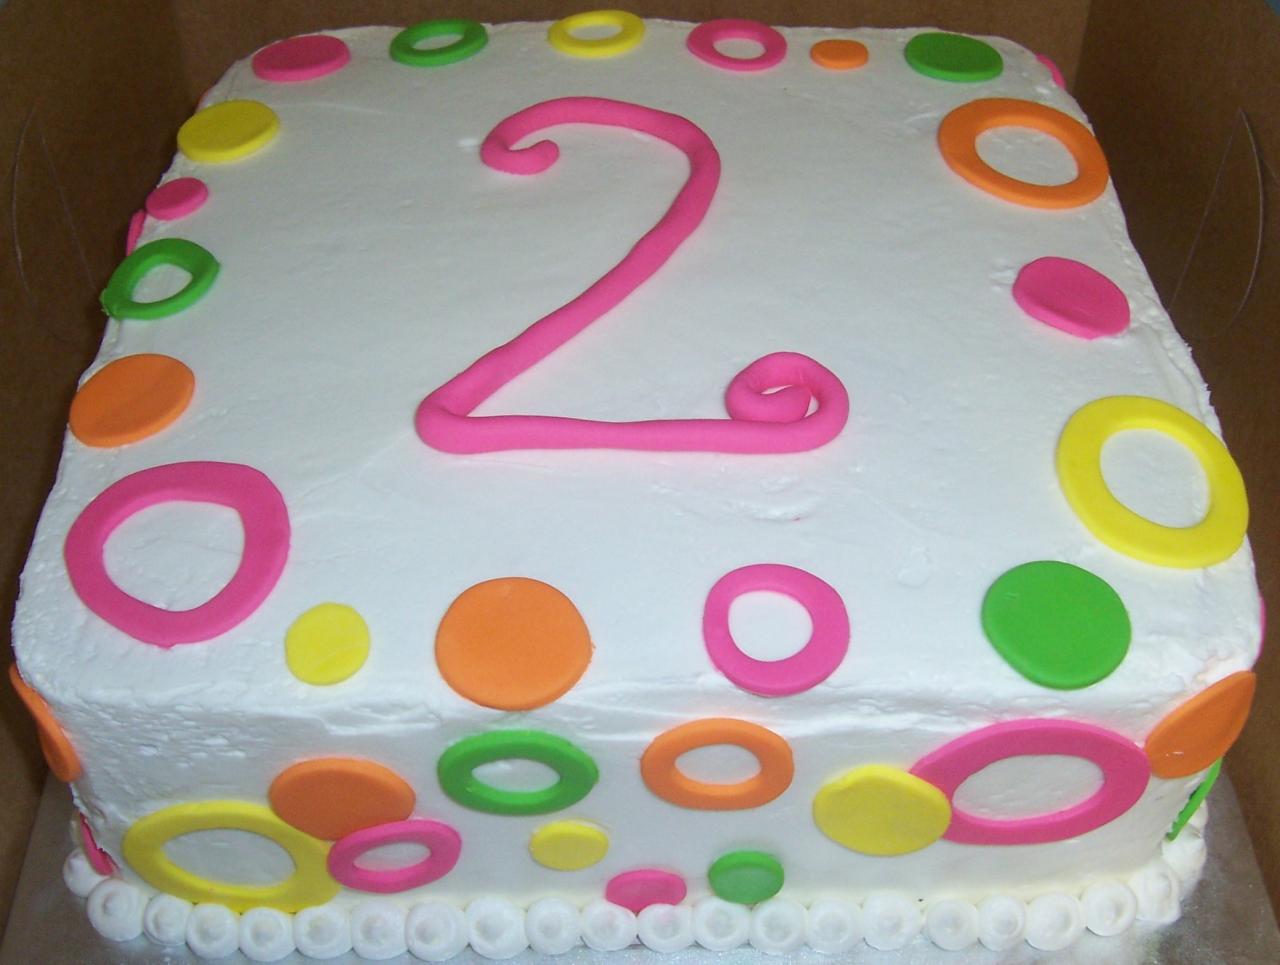 Cake_for_two_year_old.13925041_large.jpg